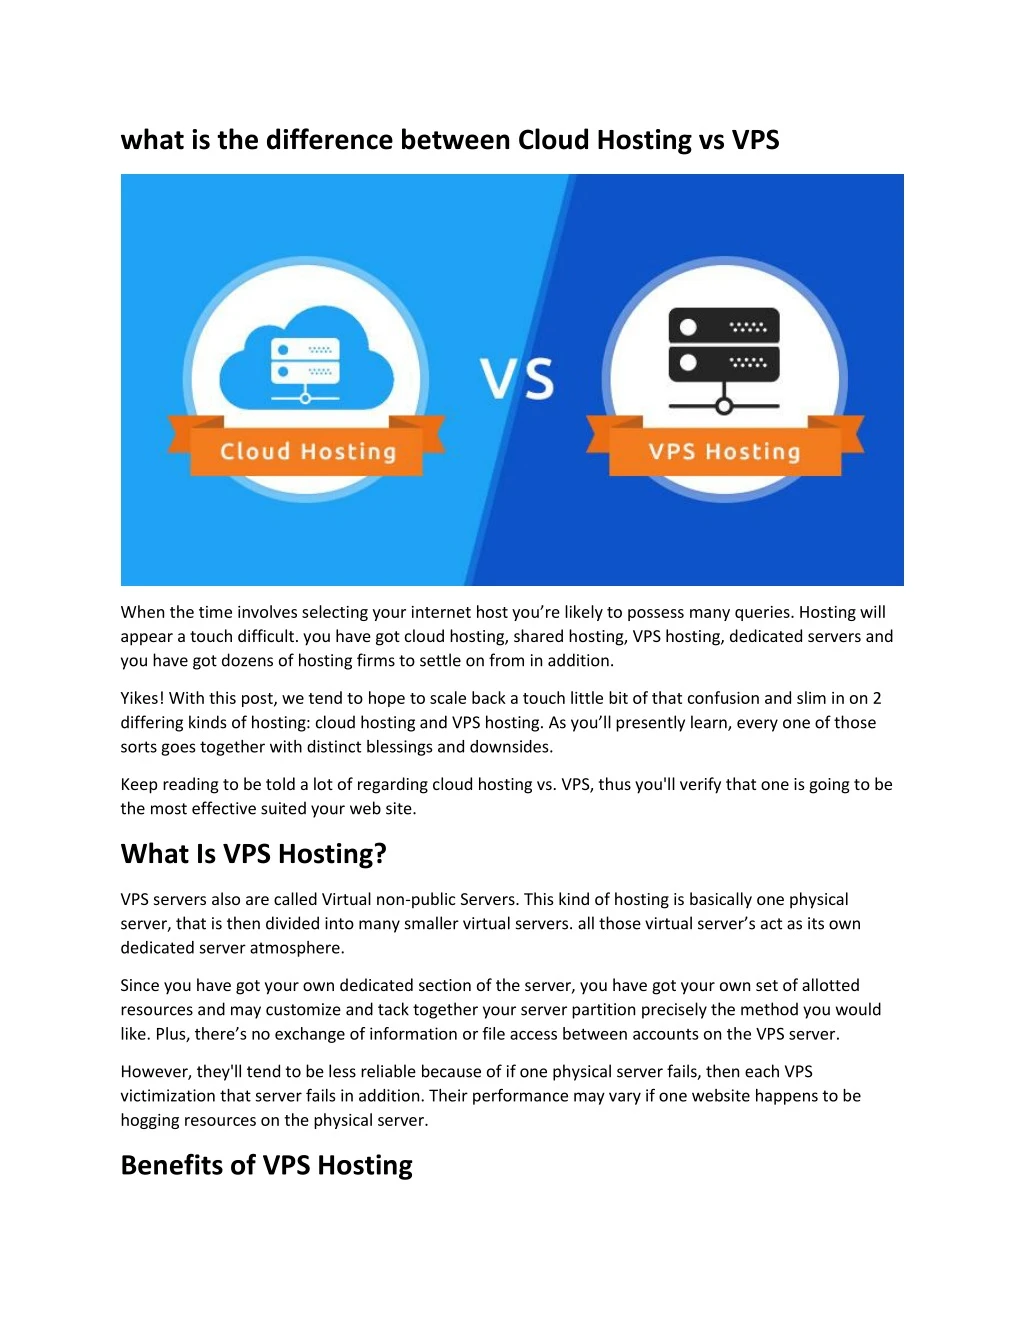 what is the difference between cloud hosting